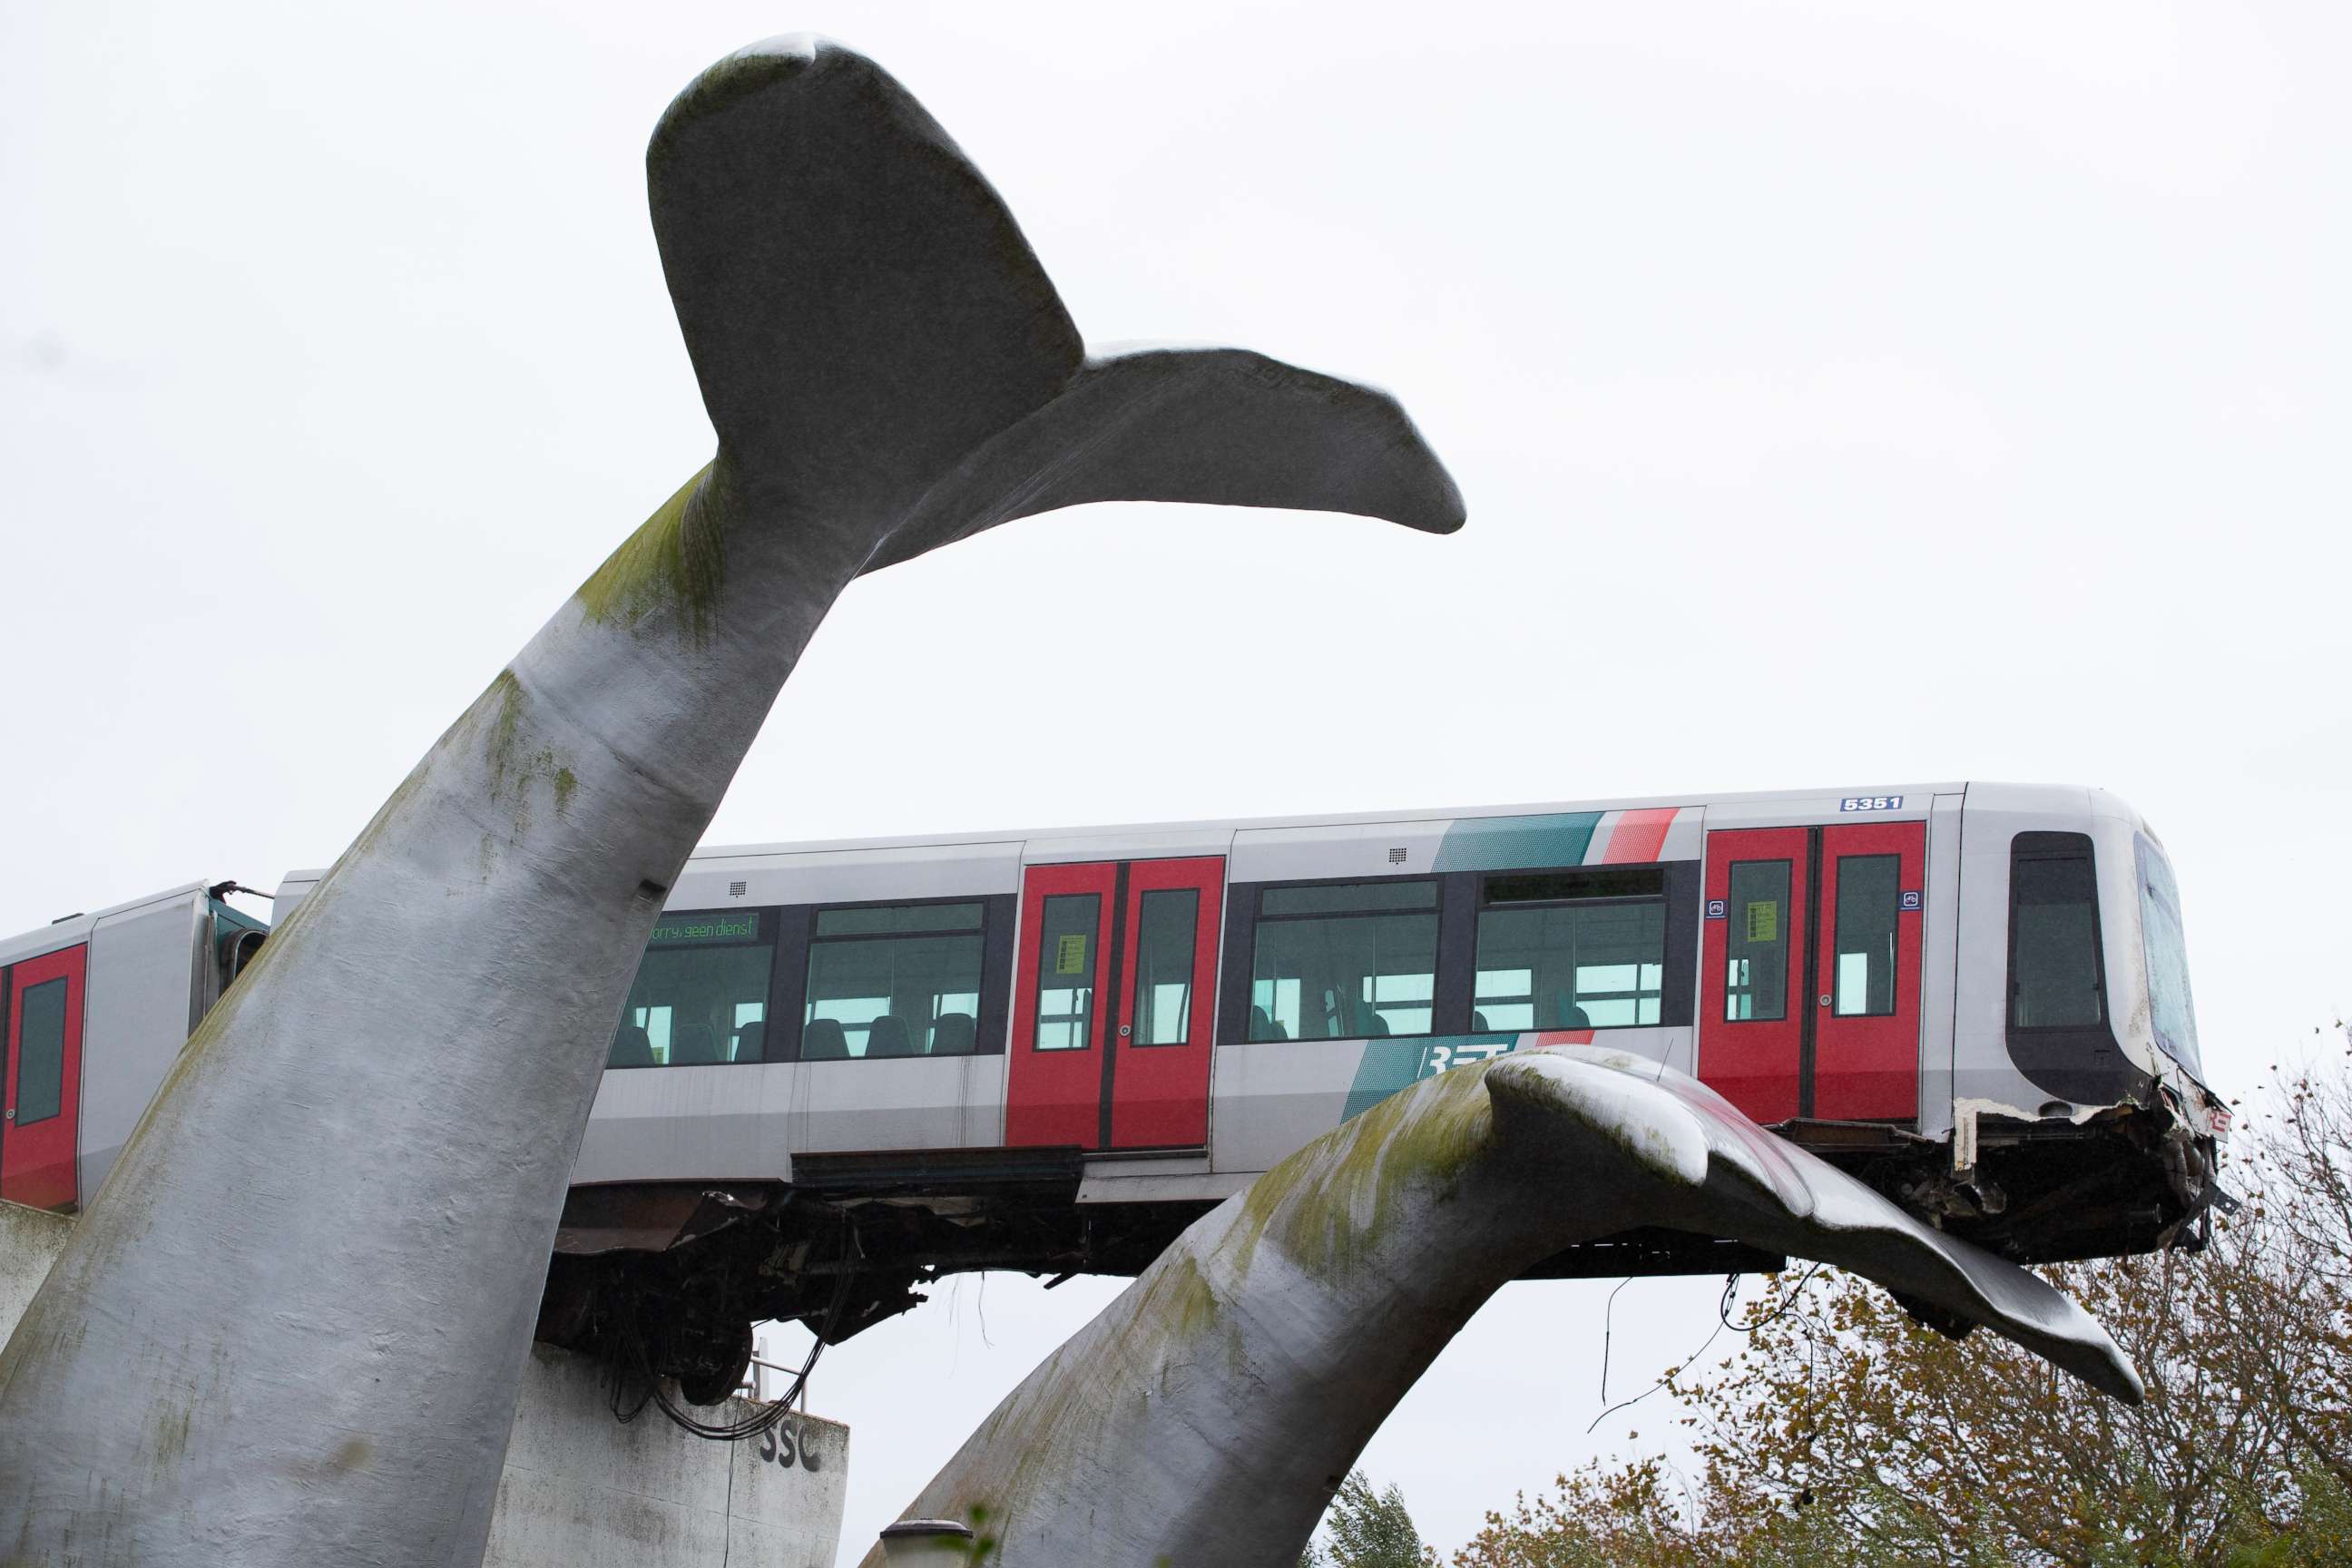 PHOTO: The whale's tail of a sculpture caught the front carriage of a metro train as it rammed through the end of an elevated section of rails with the driver escaping injuries in Spijkenisse, near Rotterdam, Netherlands, Monday, Nov. 2, 2020.